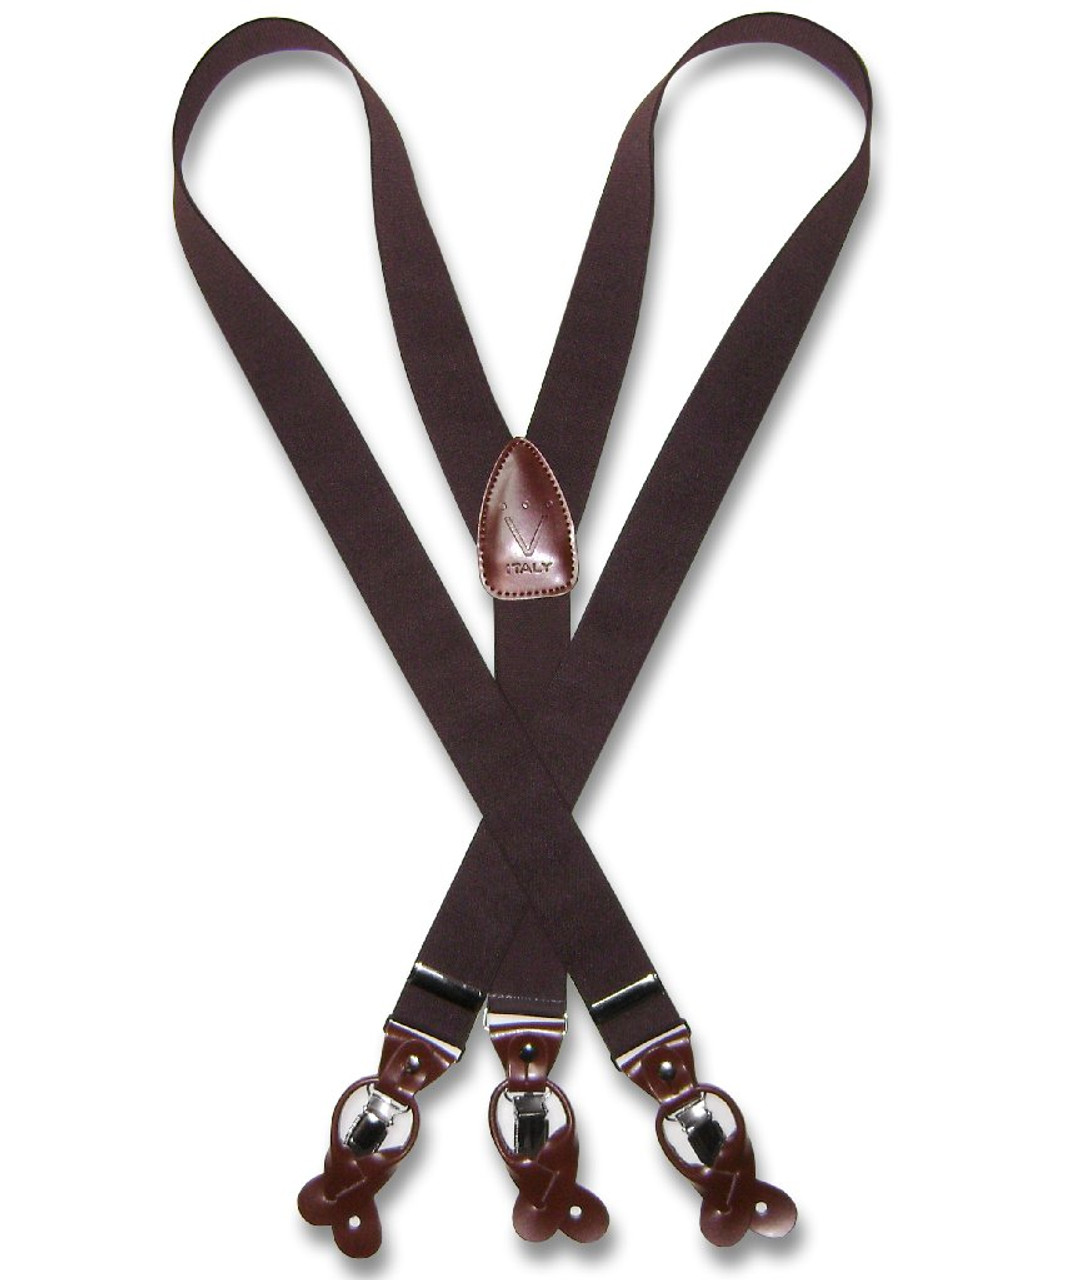 Adjustable Brown Leather Suspenders Braces for Men with Button